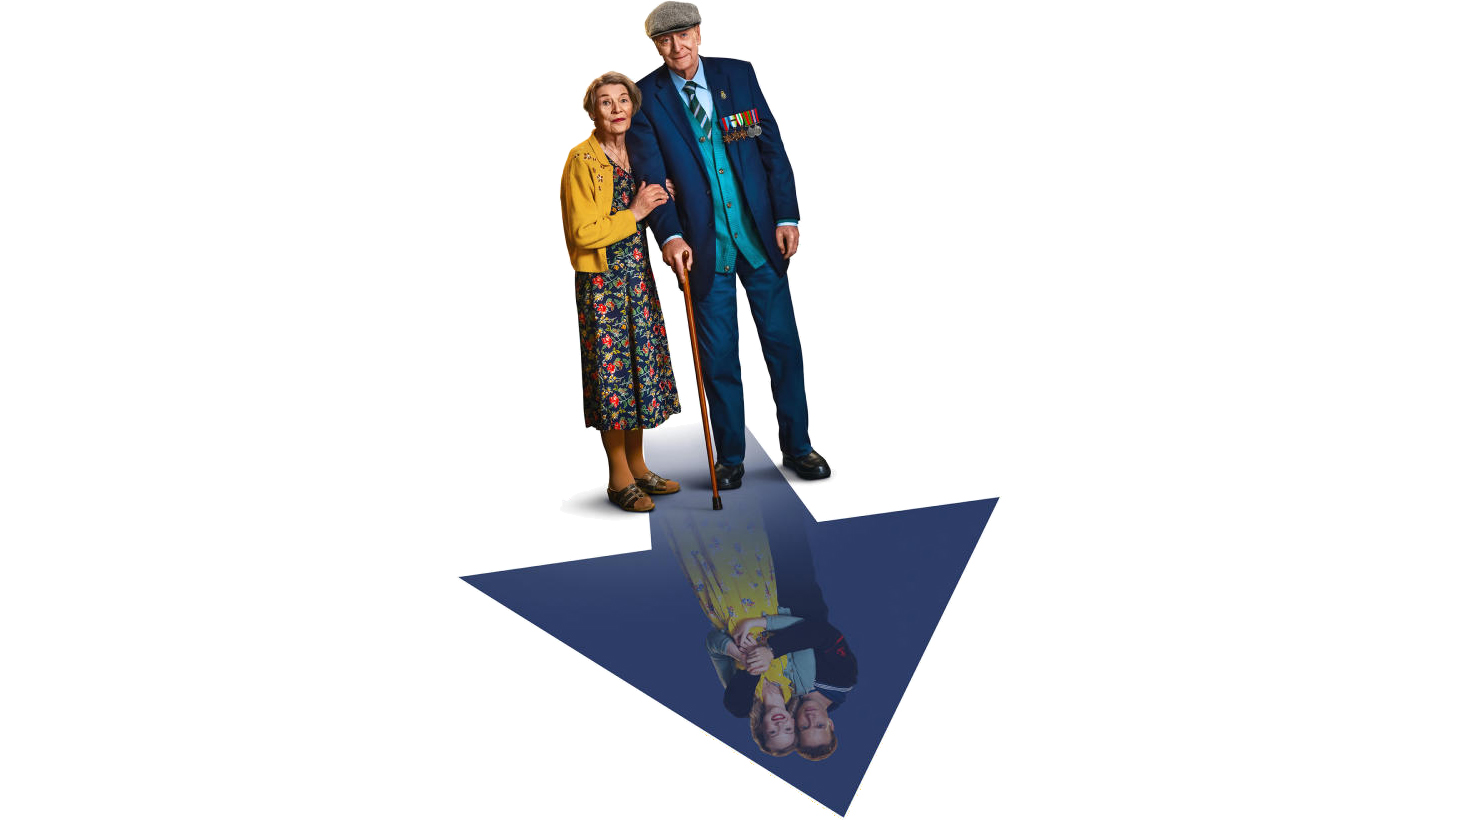 A middle-aged man and woman, supporting each other, facing the camera, with a dark blue arrow pointing forward, showing a reflection of younger versions of them.